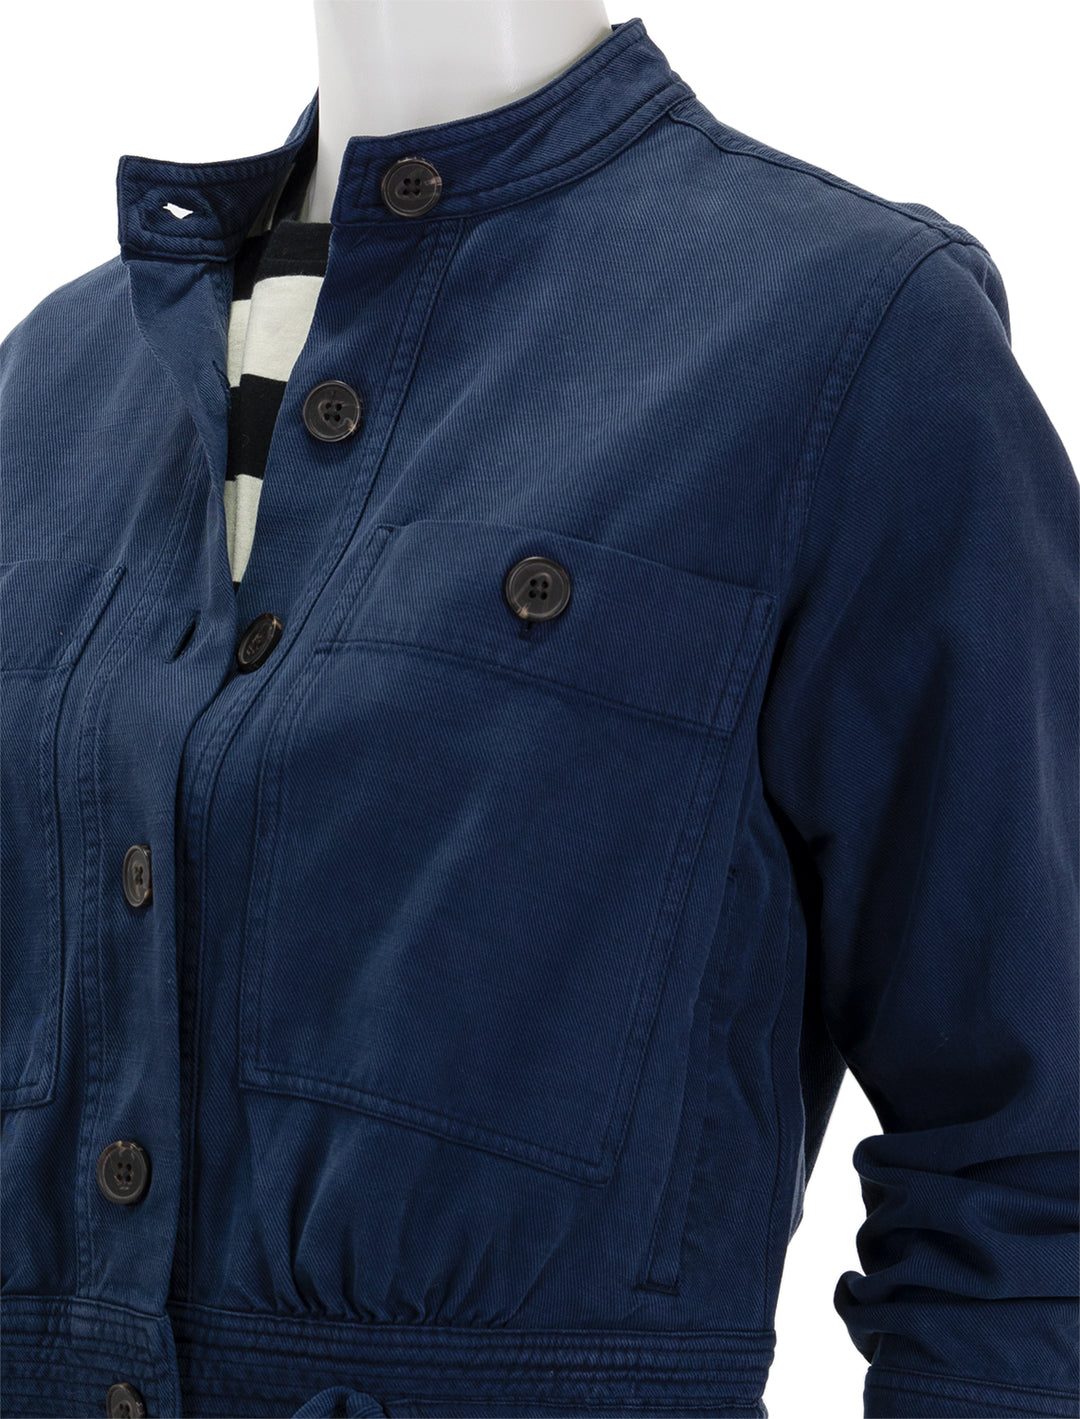 Close-up view of Rails' alma jacket in navy.